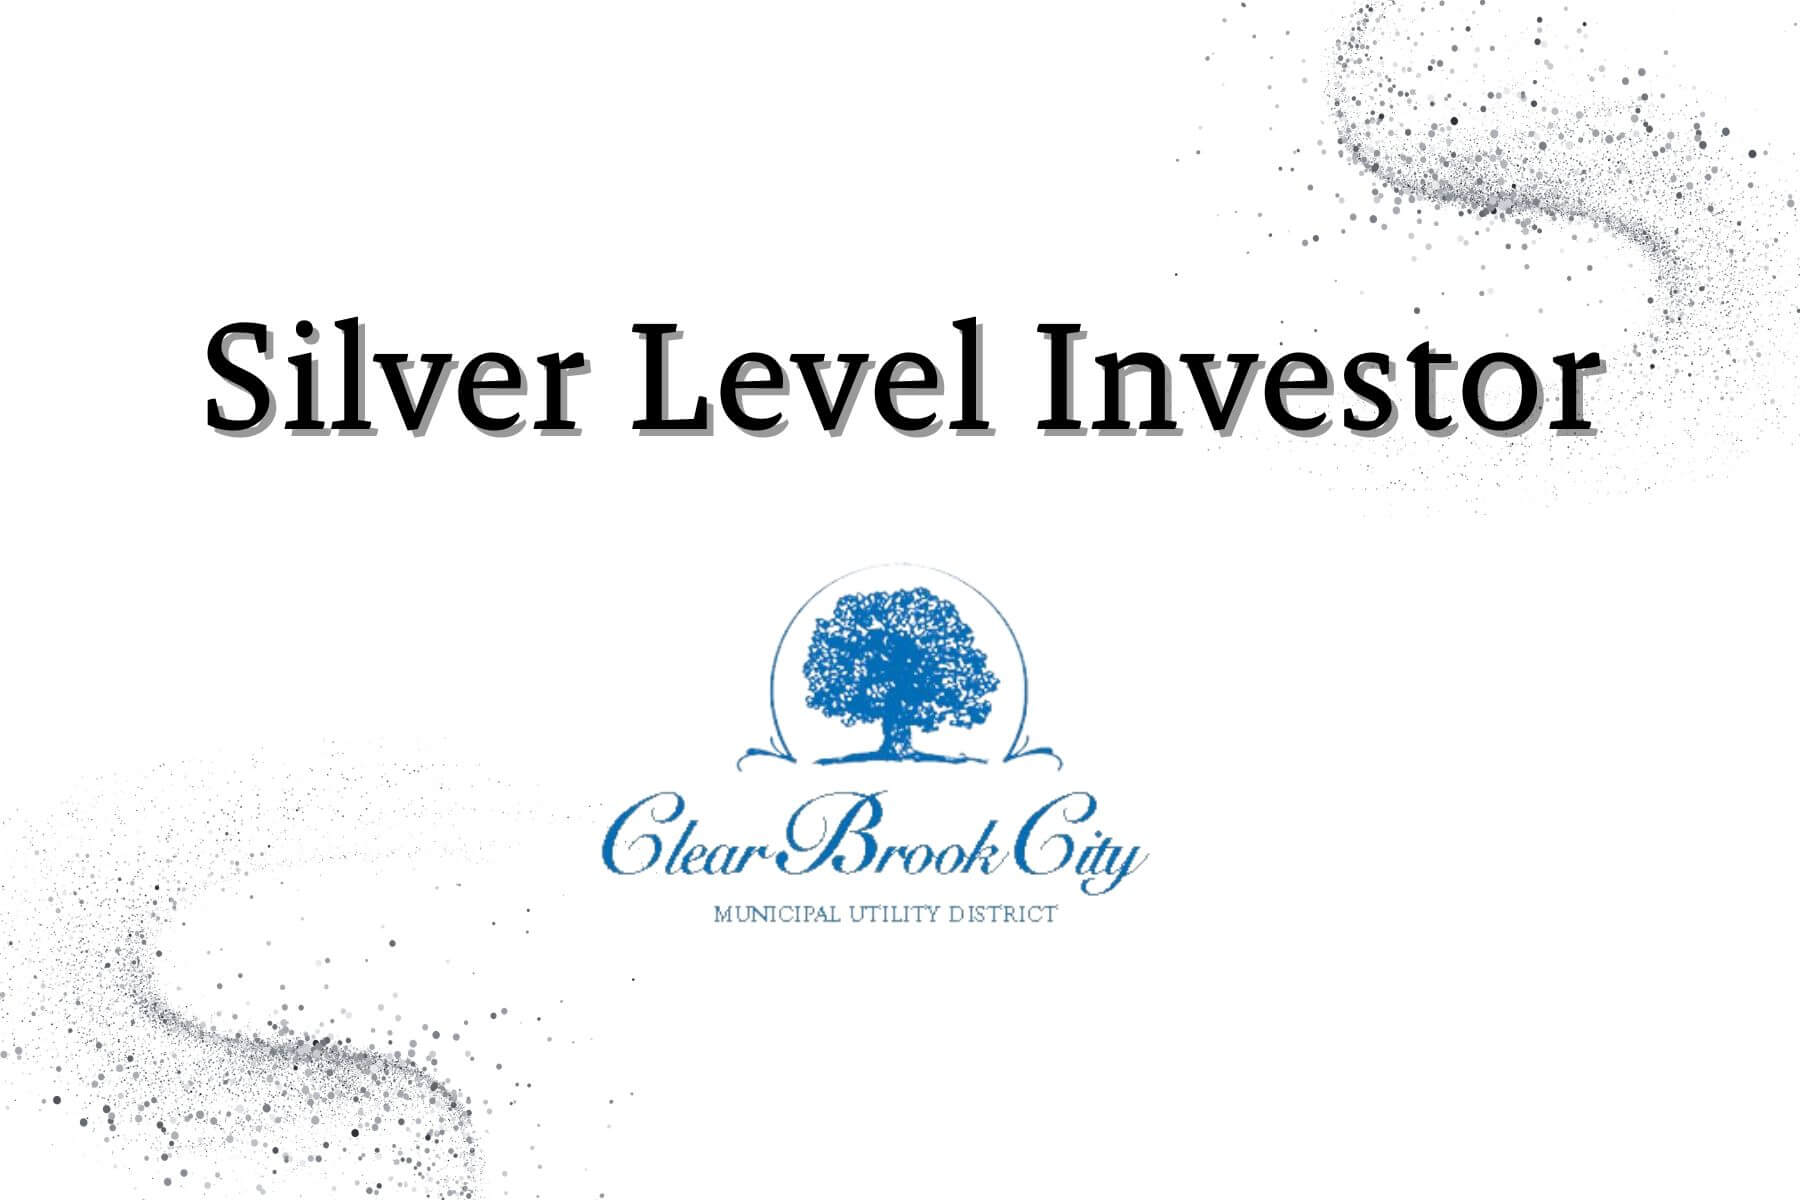 Clear Brook City MUD Silver Level Investor